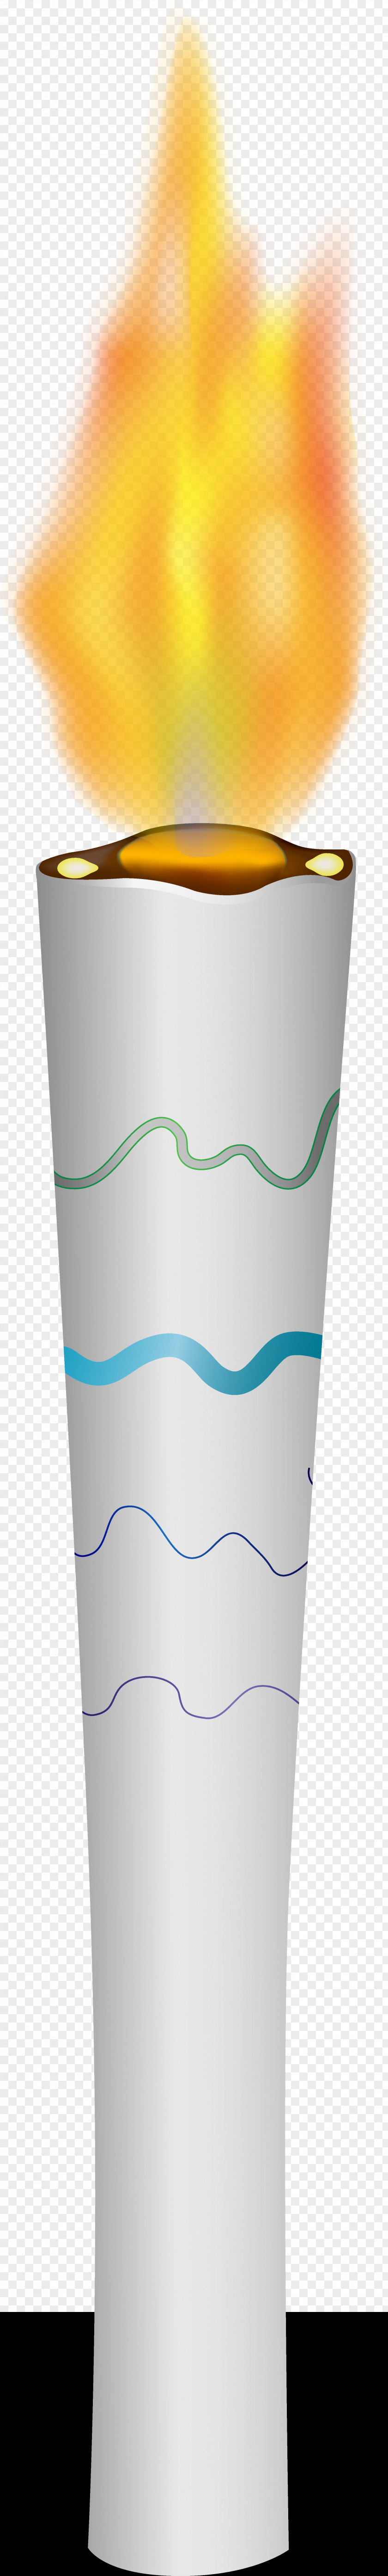 Rio Olympic Torch Ice Cream Cone PNG